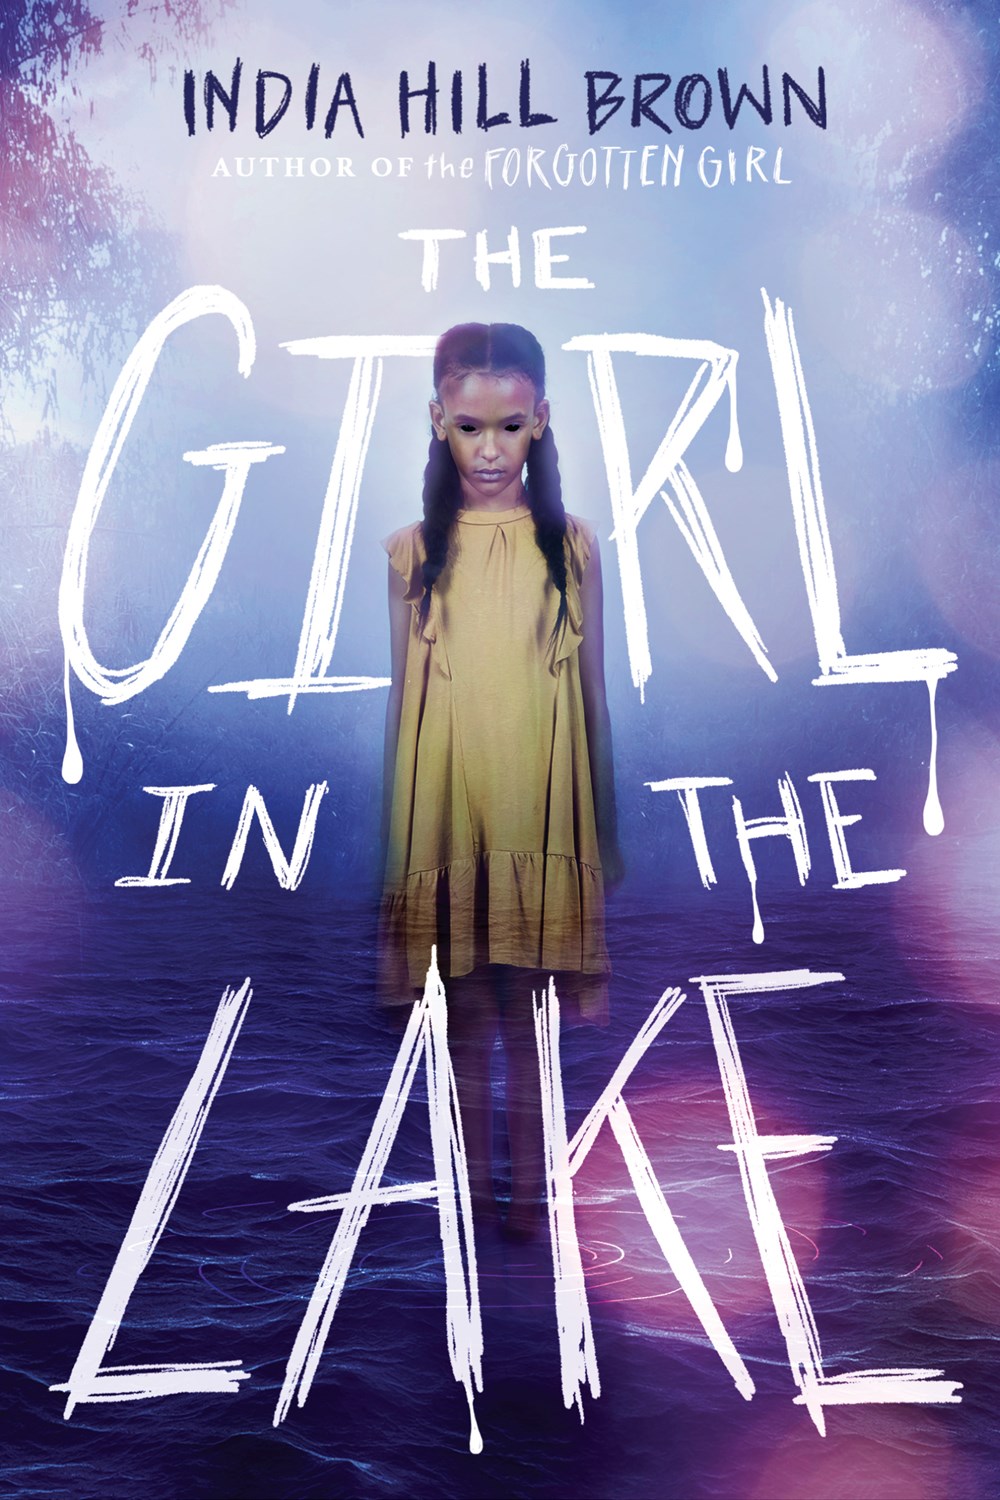 Image for "The Girl in the Lake"